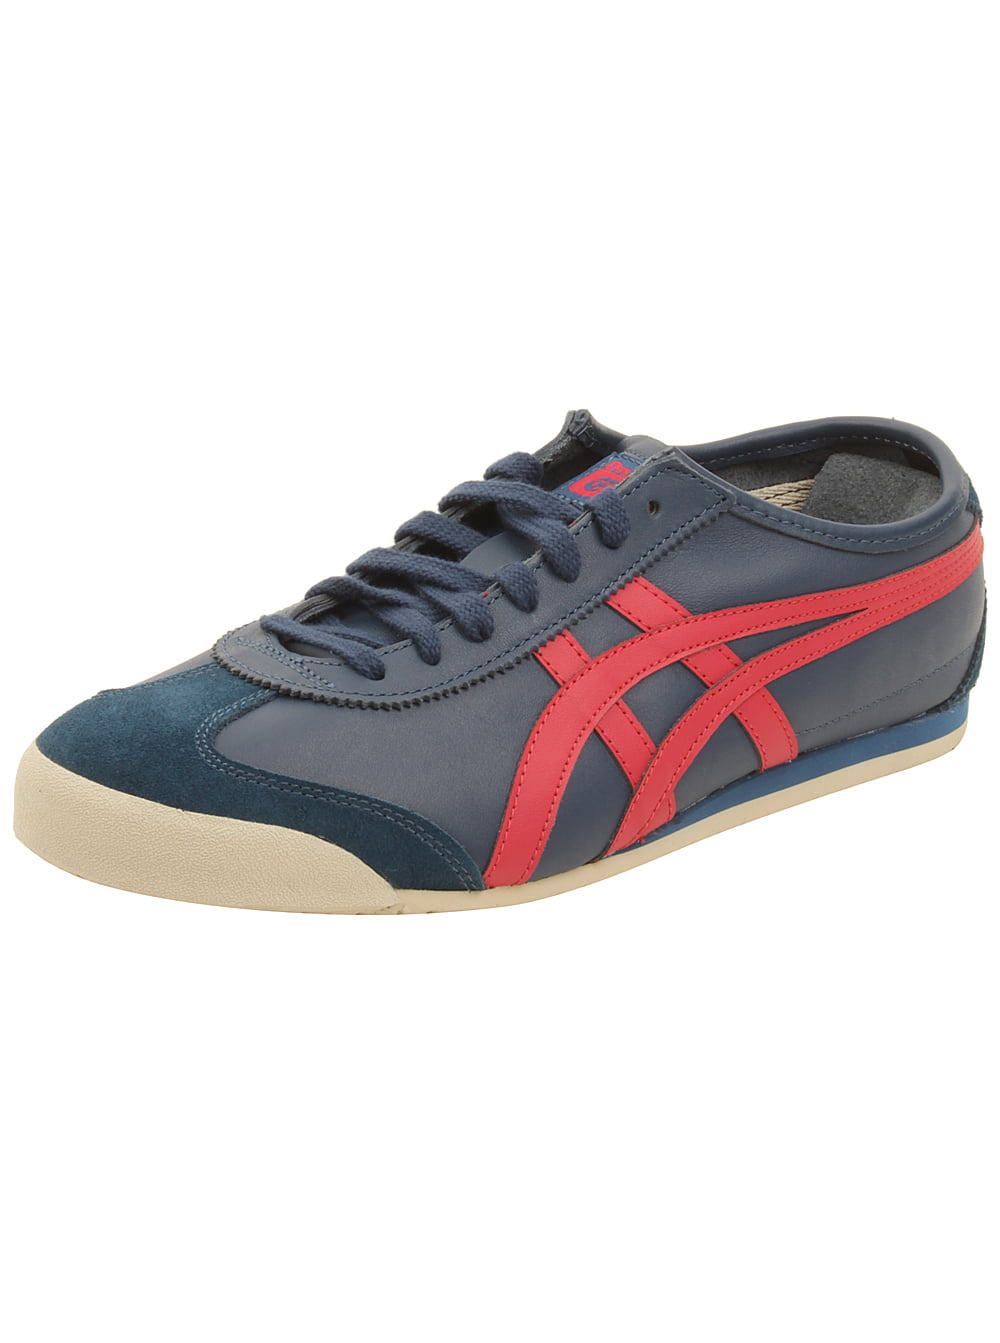 overschot stad zoete smaak Onitsuka Tiger by Asics Mexico 66 Sneakers in Poseidon/Classic Red -  Walmart.com